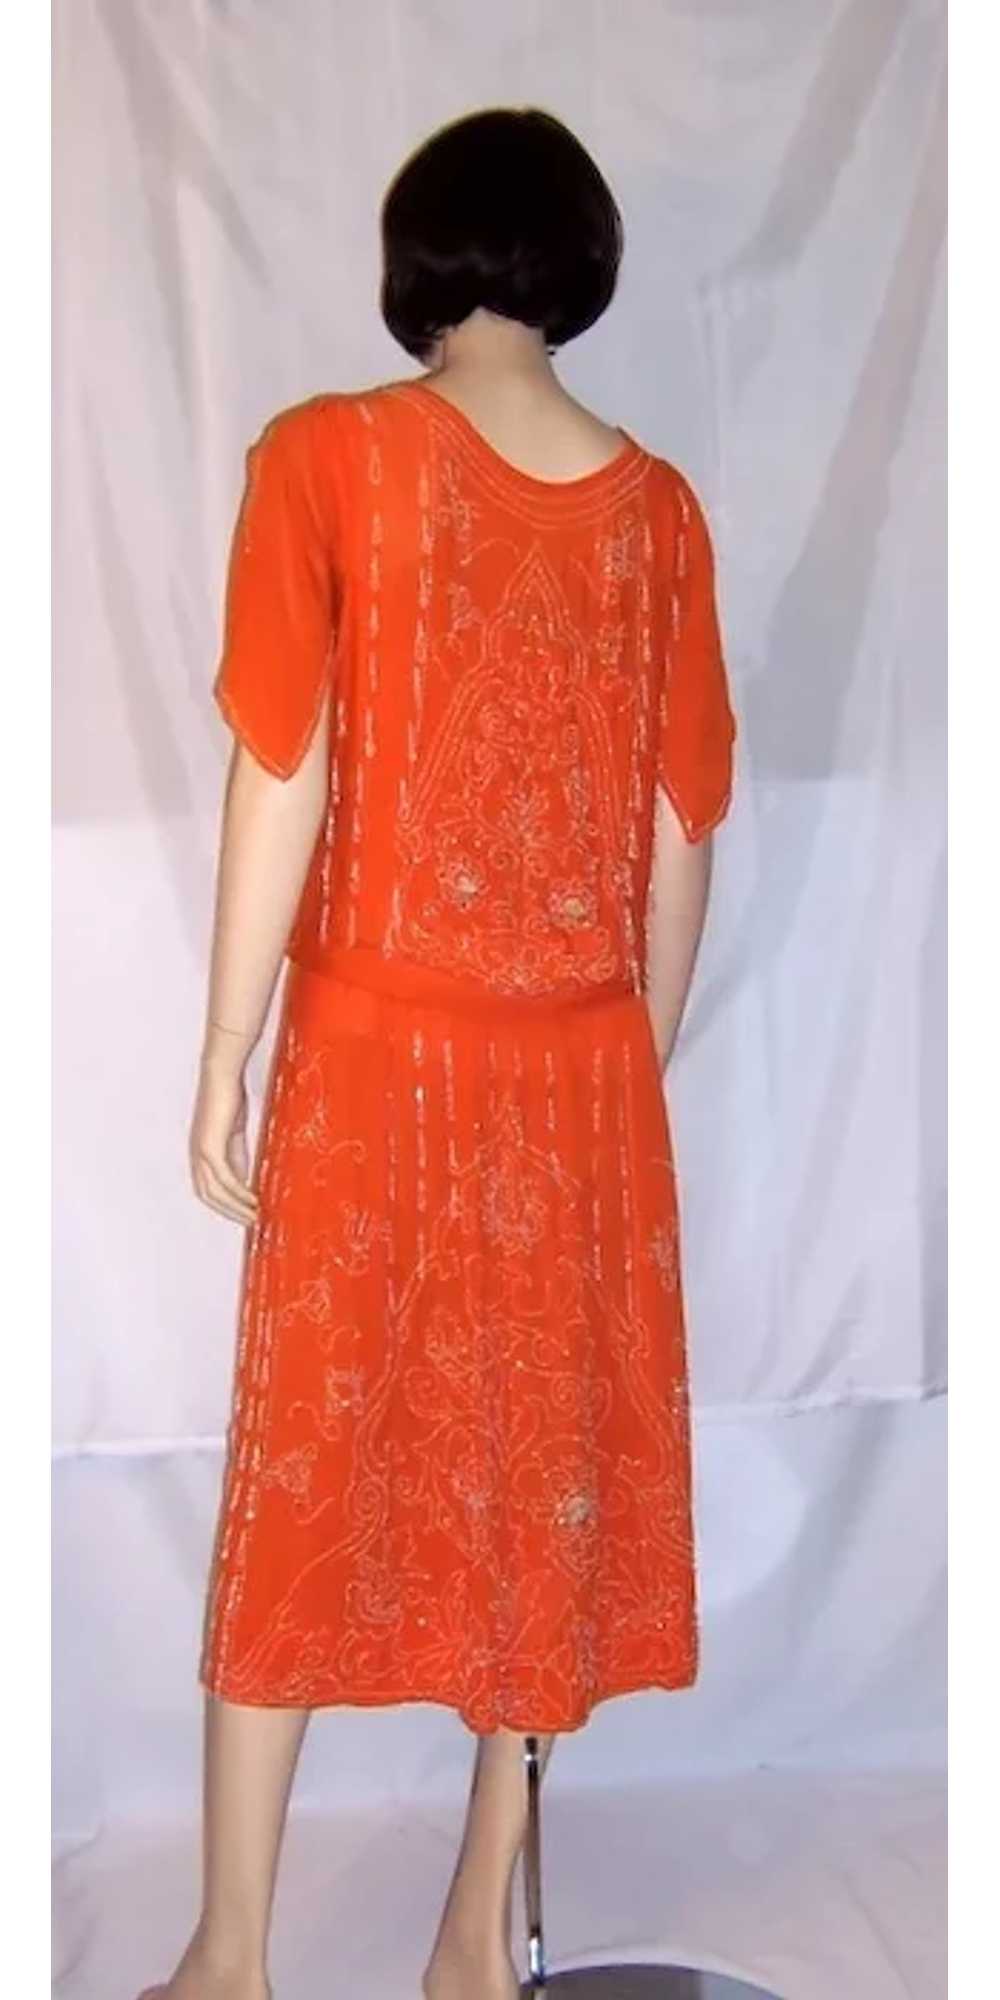 Early 1920's Vivid Orange Gown with White Beadwor… - image 5